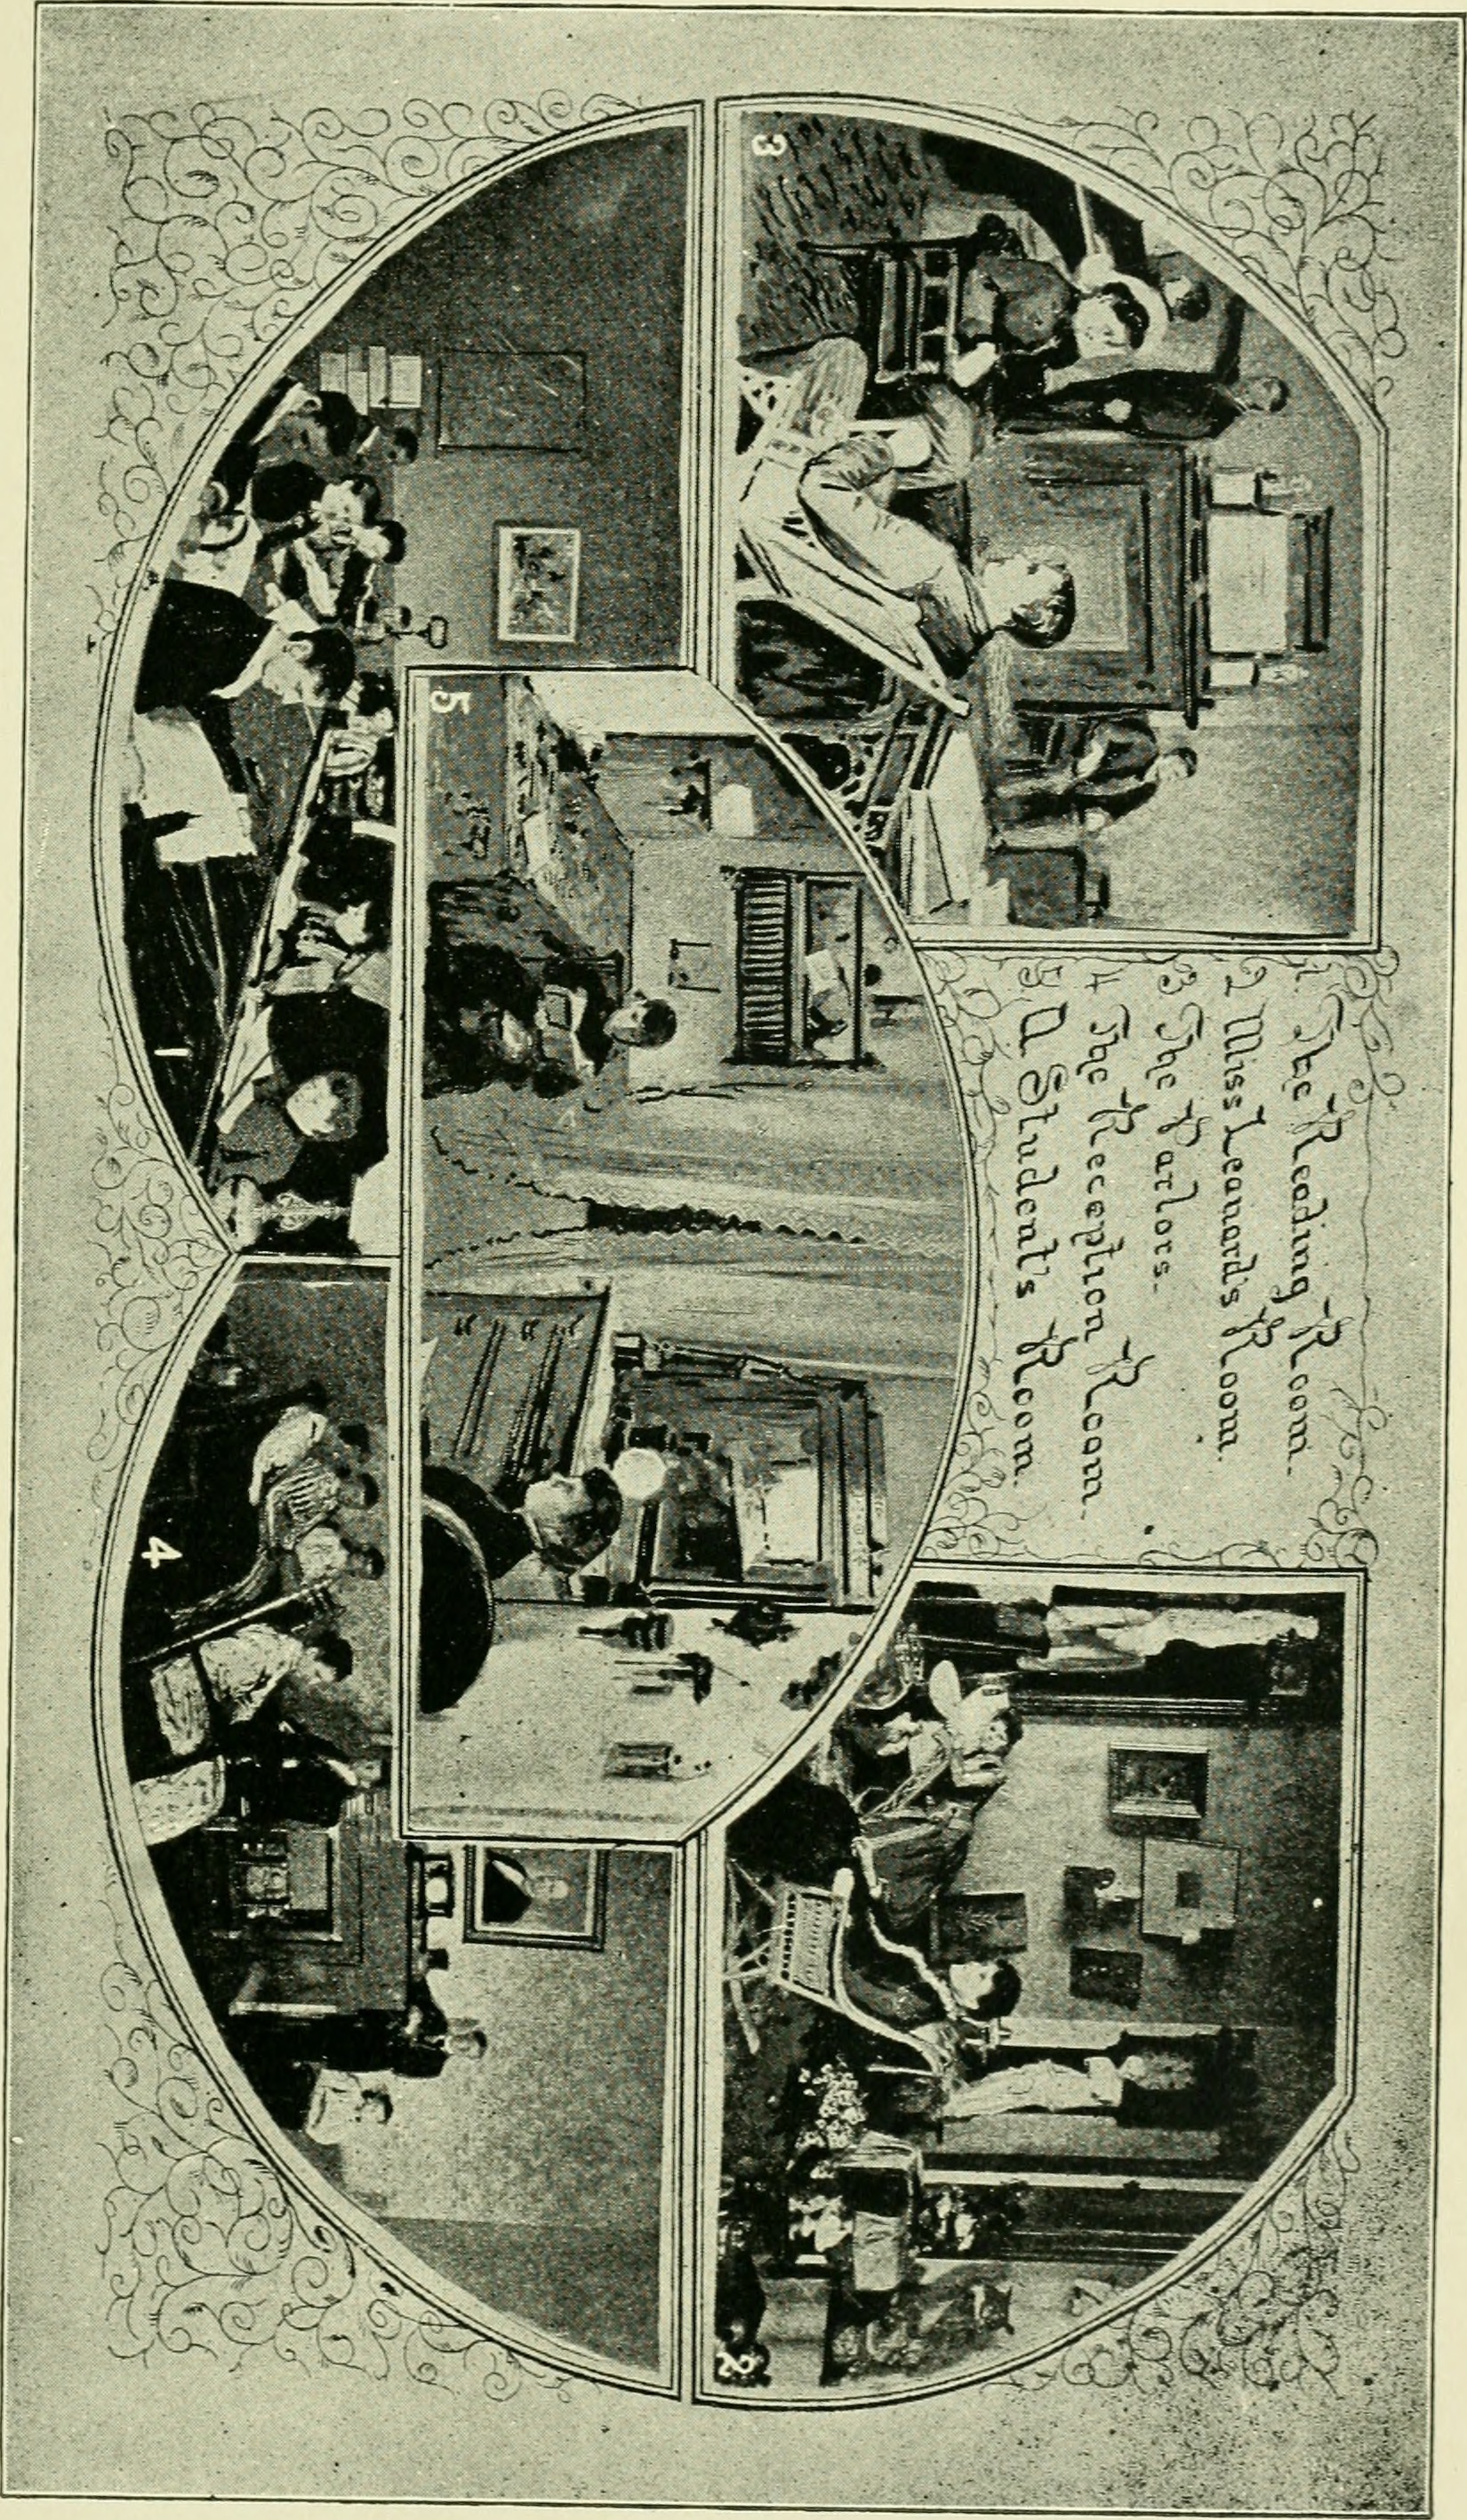 Image from page 54 of "Annual catalogue of the Indiana Normal School of Pennsylvania" (1892)